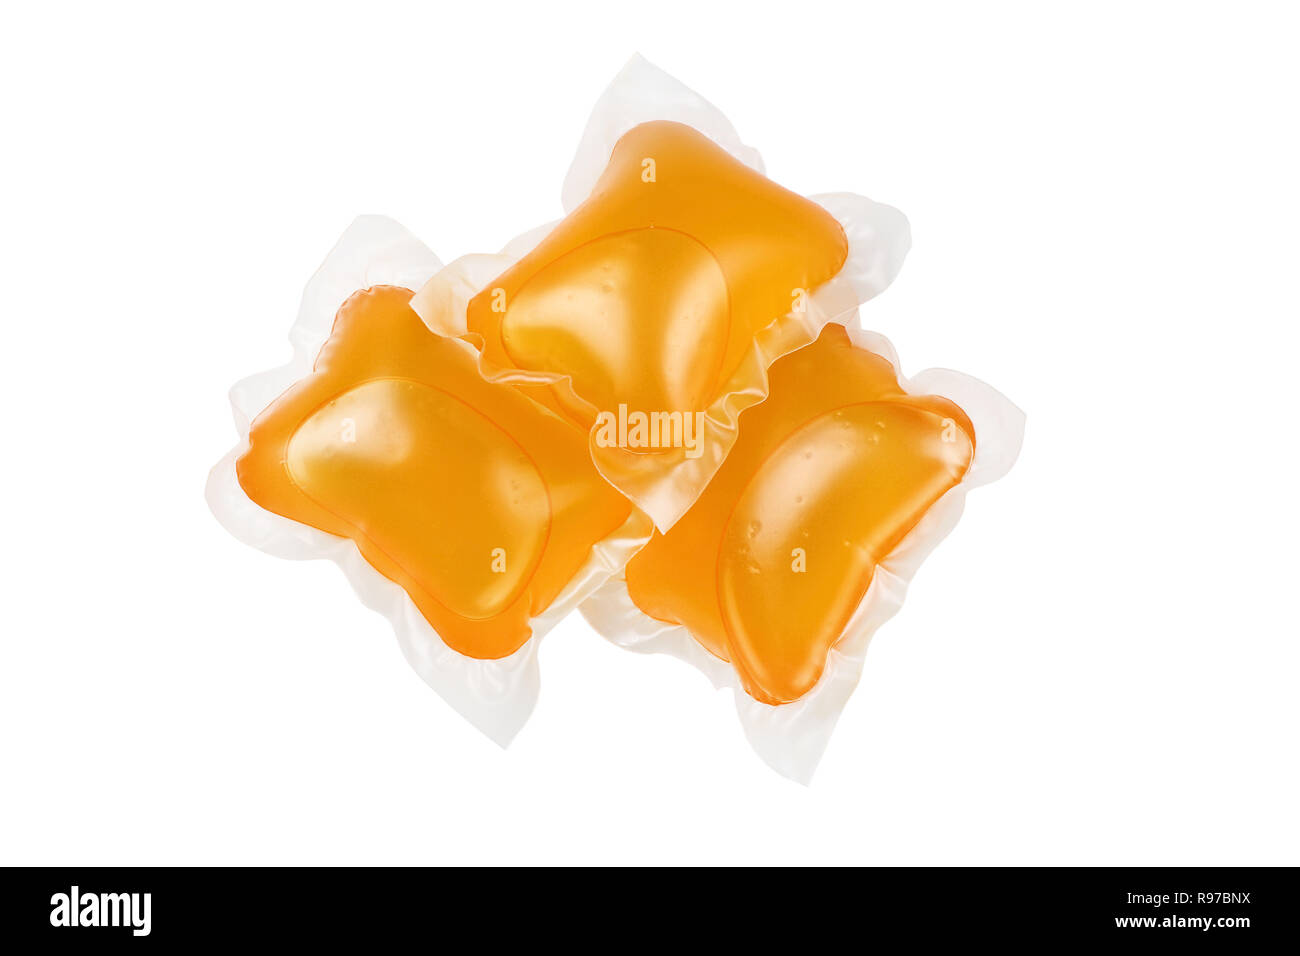 Three pods of washing detergent isolated on a white background with clipping path included. Stock Photo